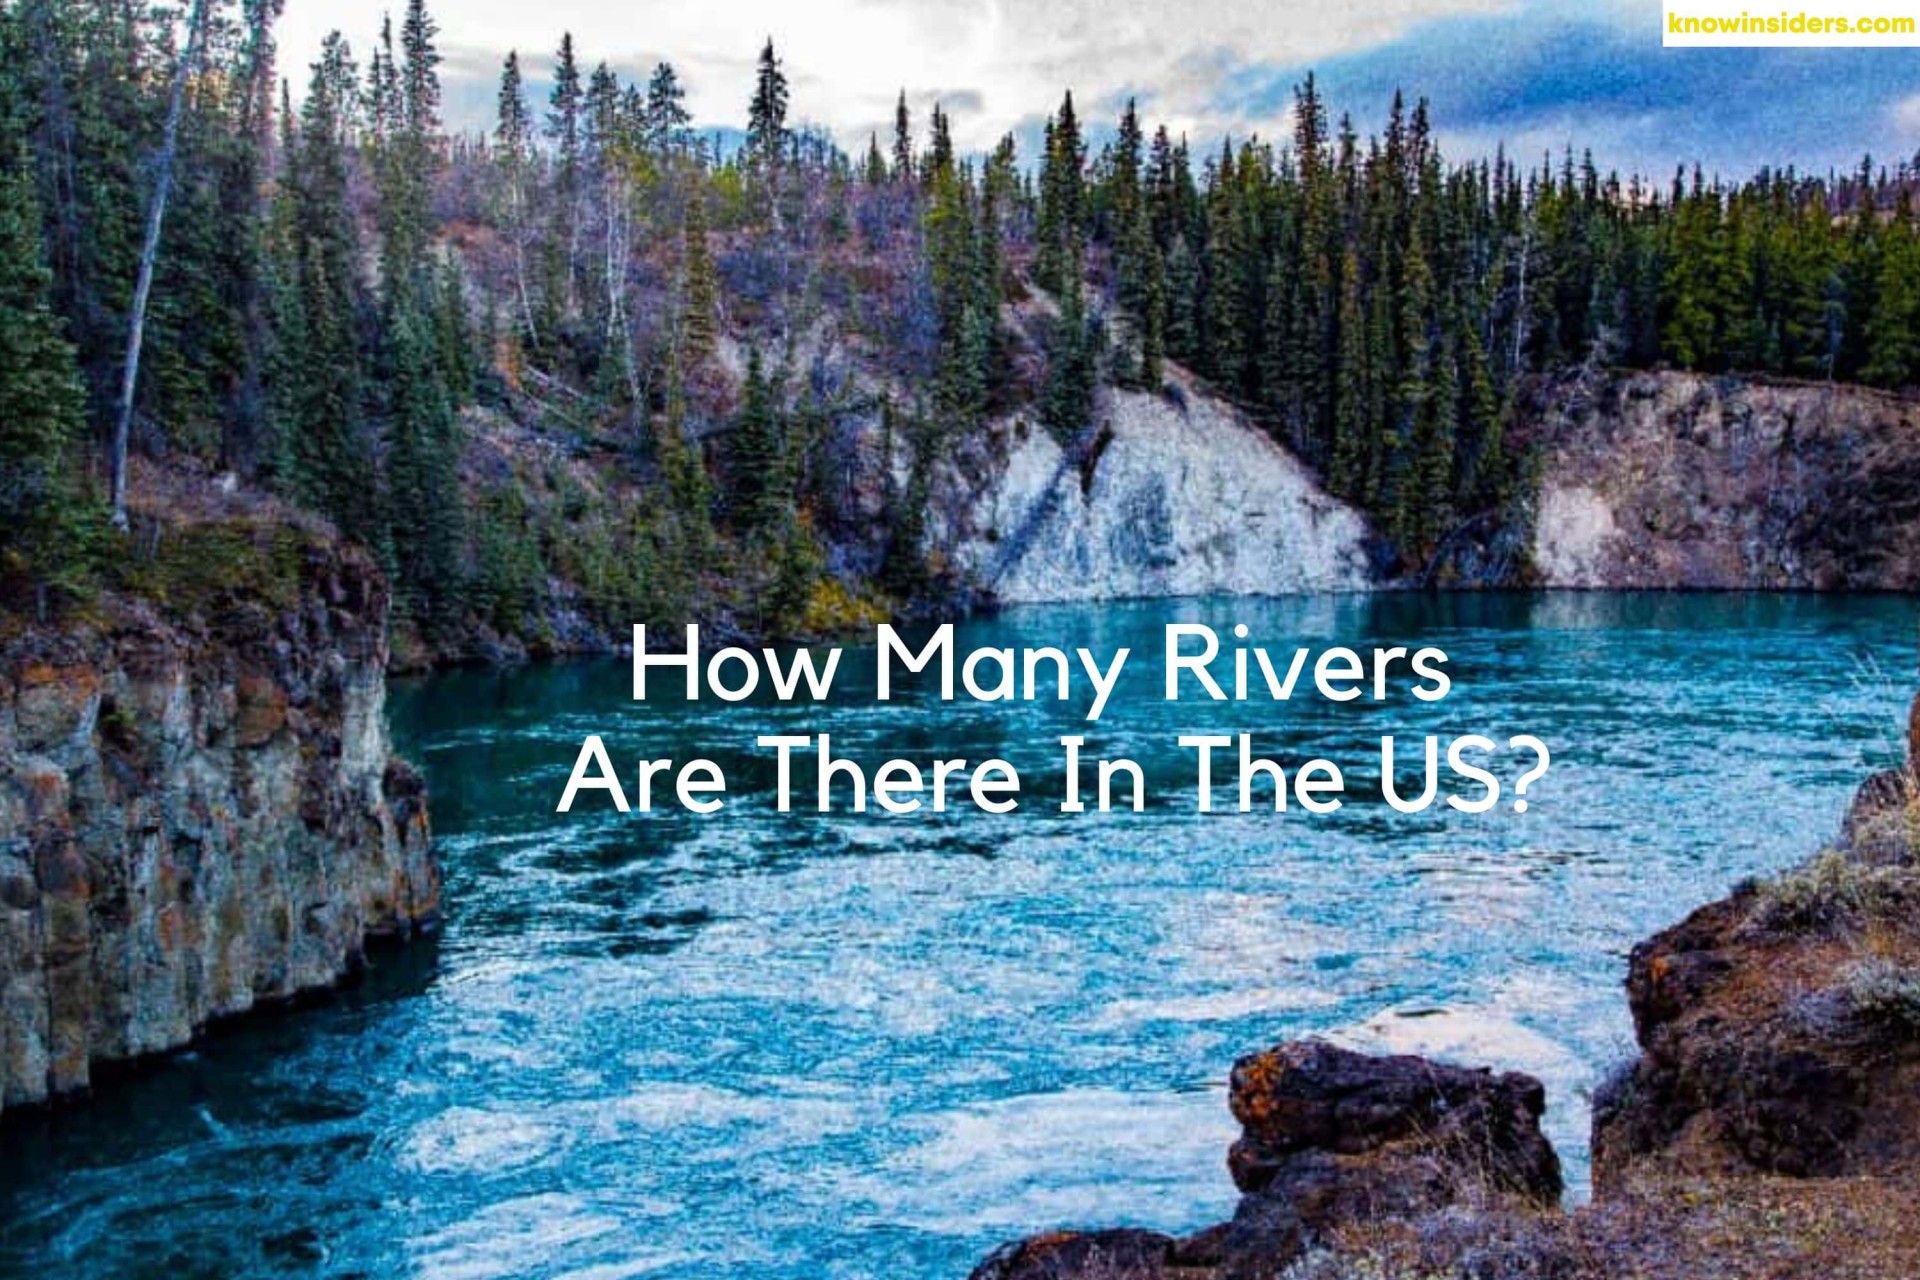 How Many Rivers Are There In The US: Over 250,000